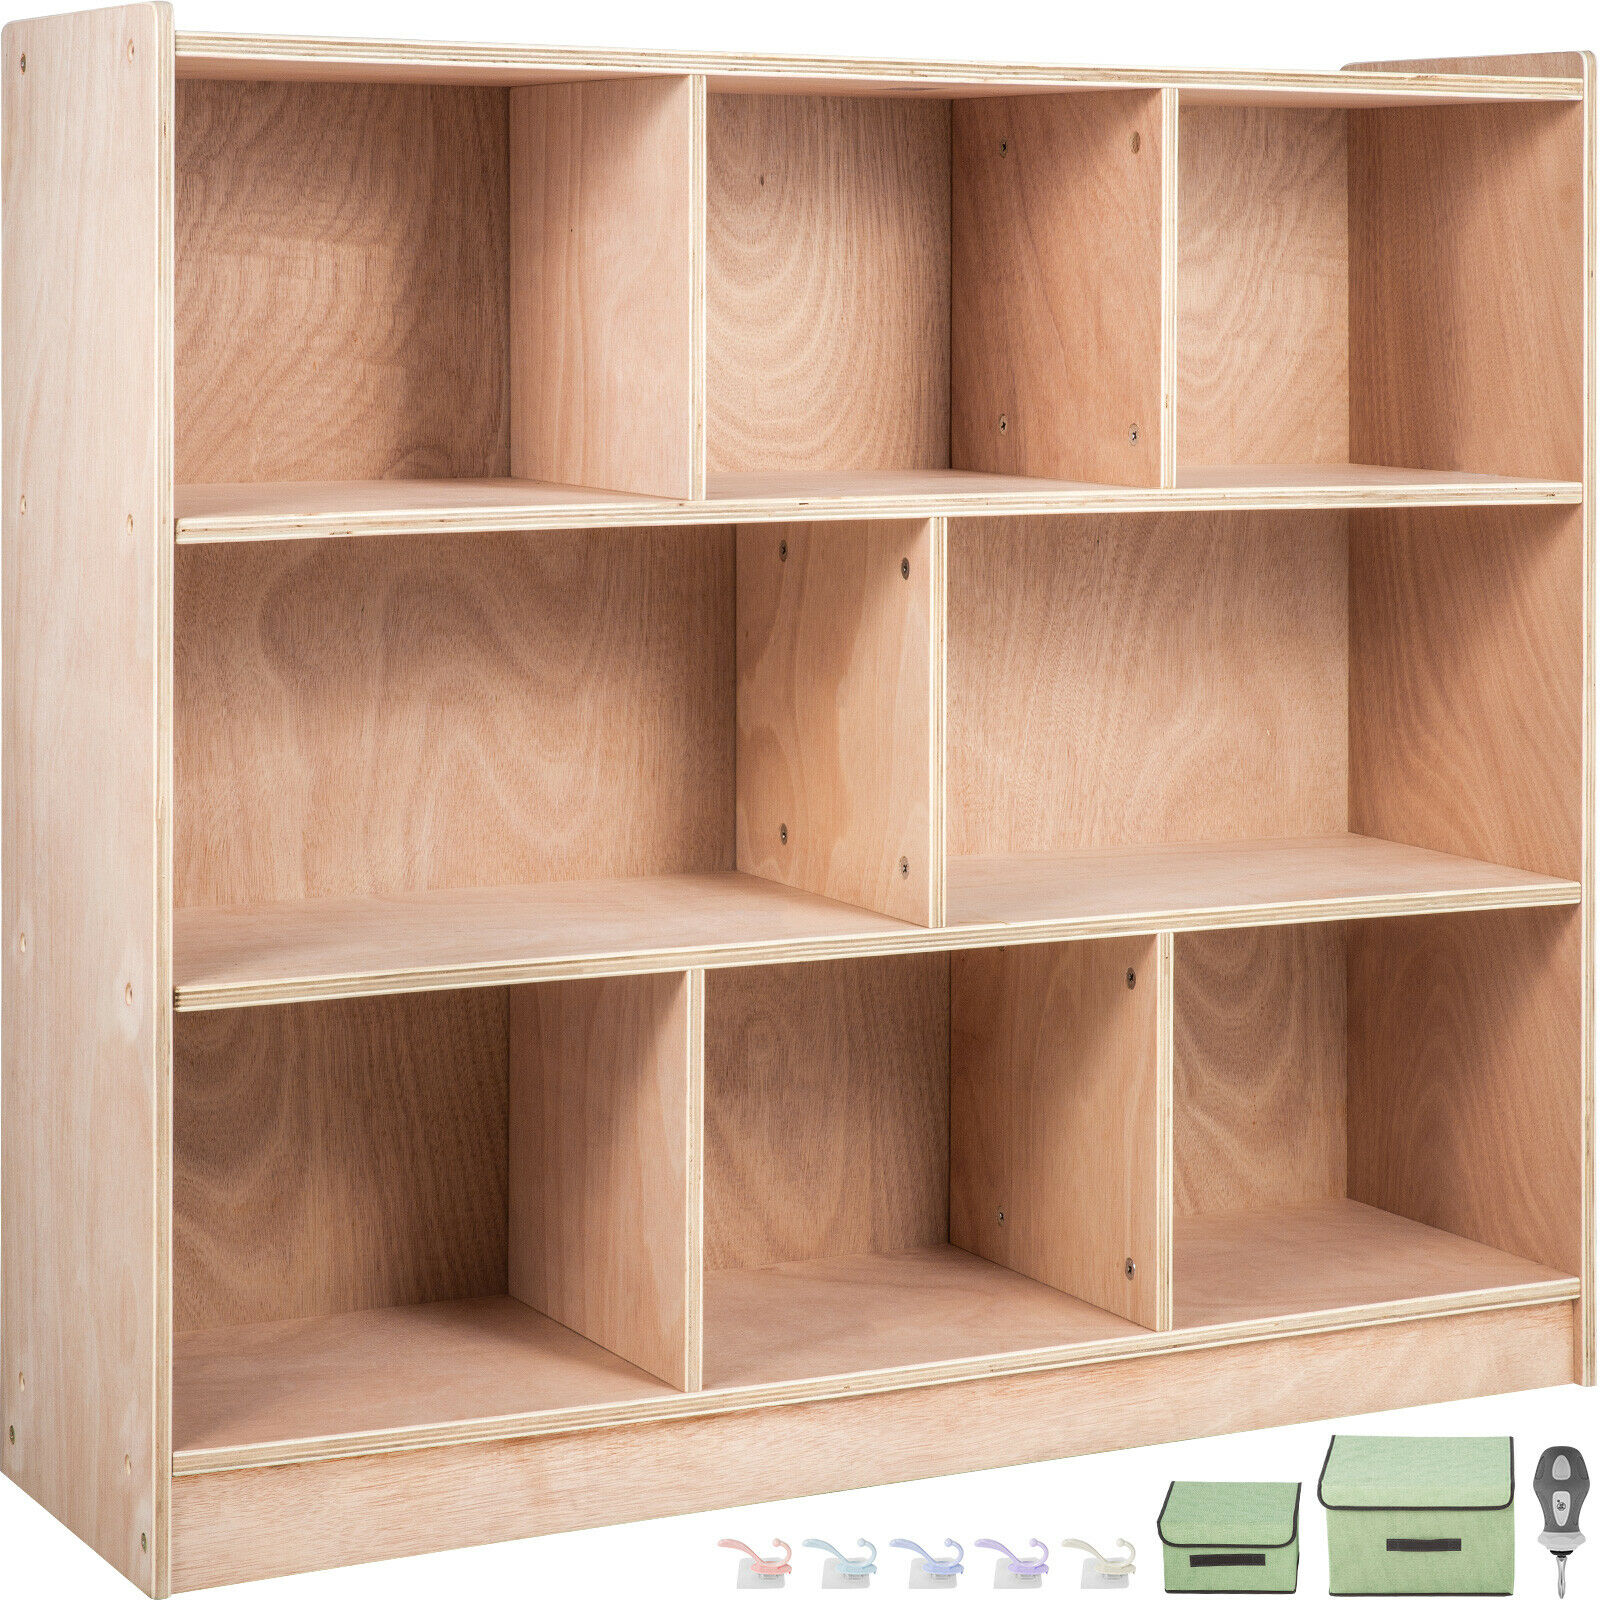 5-Section,48.4 Inch High,Classroom